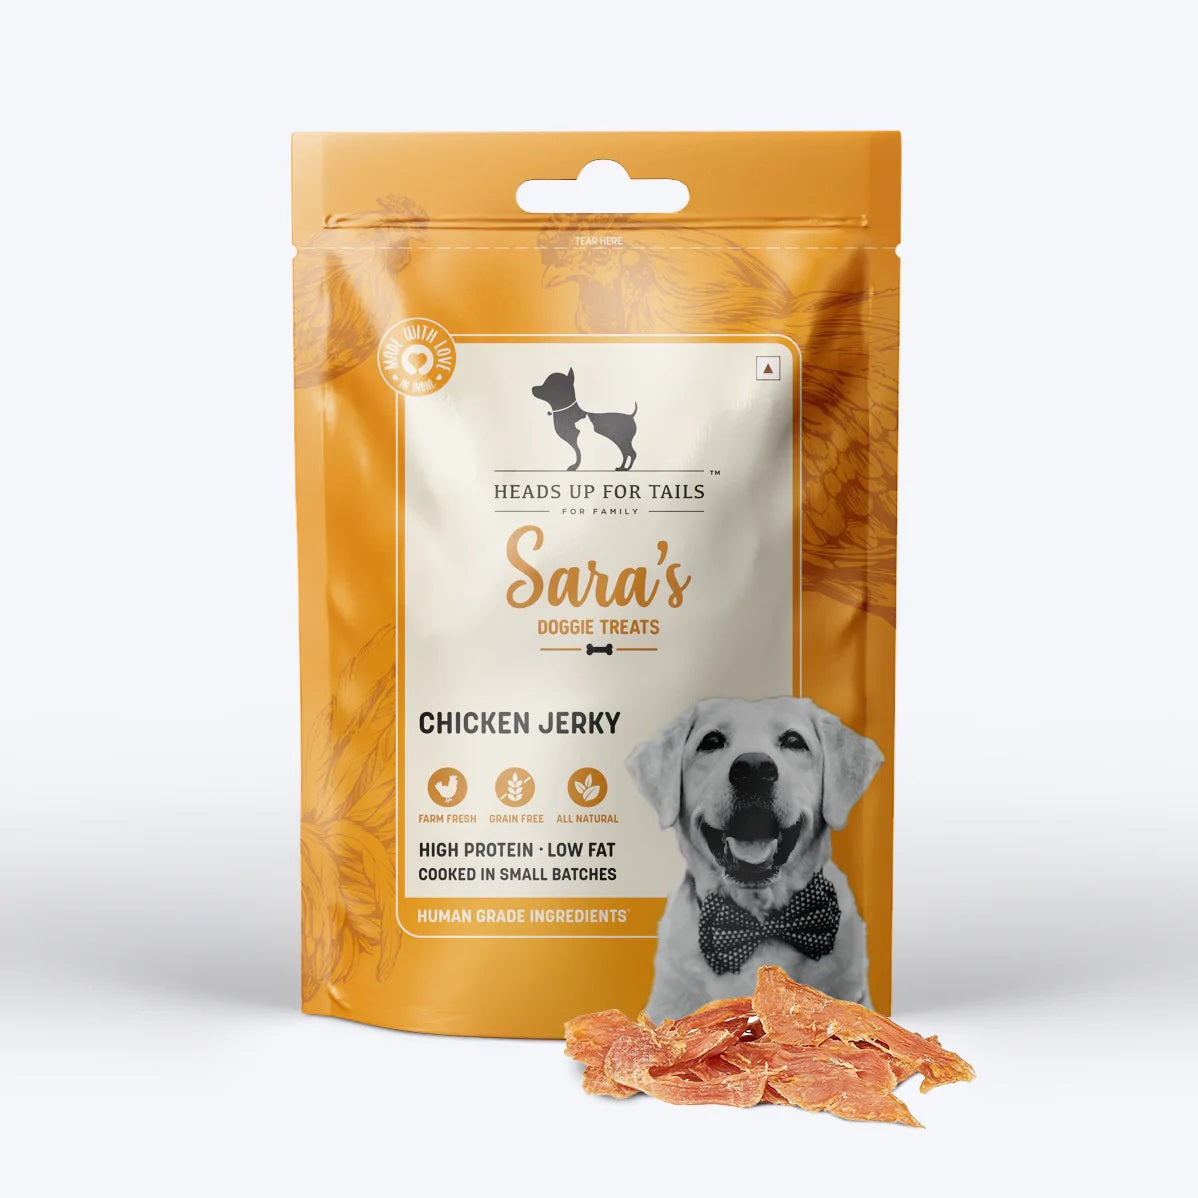 HUFT Sara's Doggie Treats Dog Treat Combo - Non-Veg (Pack of 4) - Heads Up For Tails